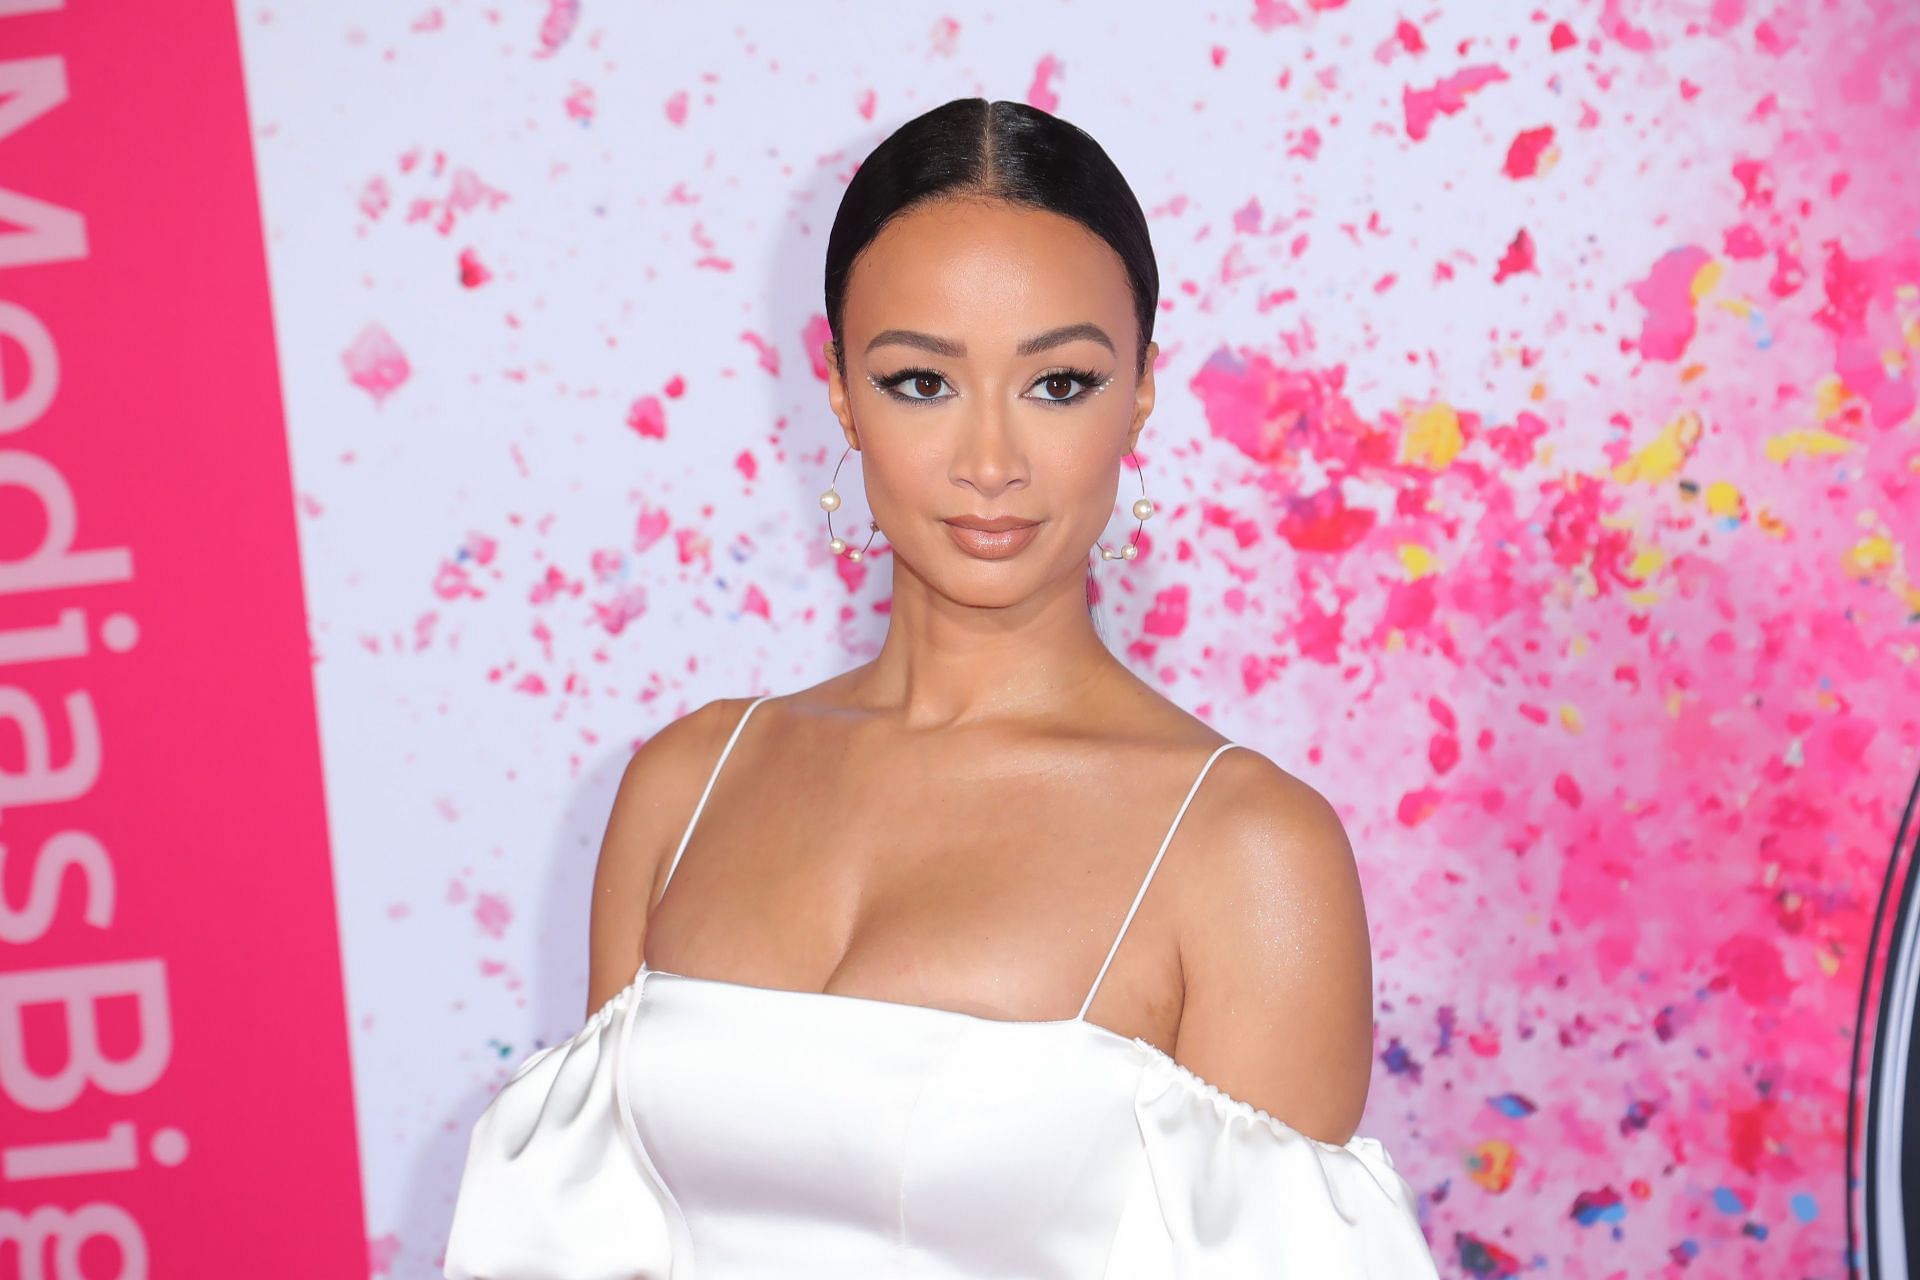 Draya Michele has two sons from her previous relationships.